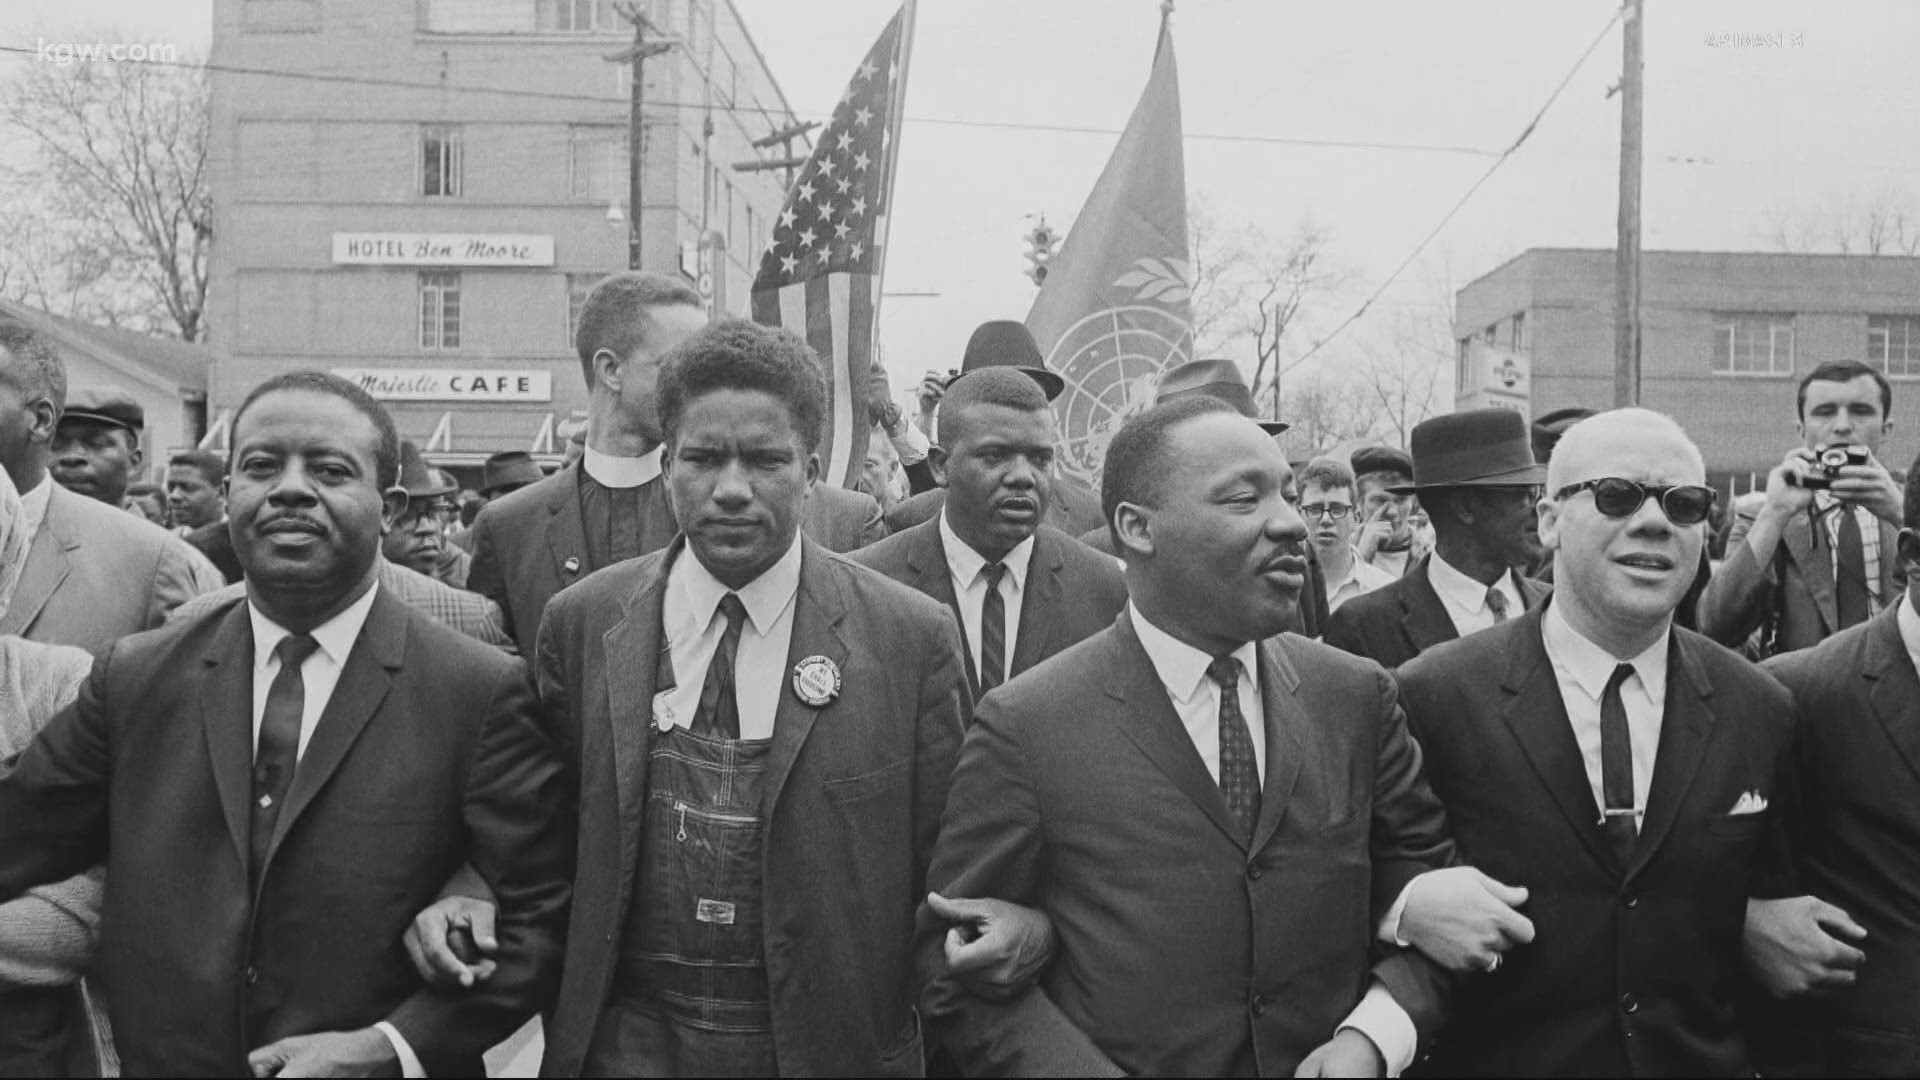 As we celebrate Martin Luther King Jr. Day, advocates for racial justice say the words of the late civil rights are more relevant than ever.